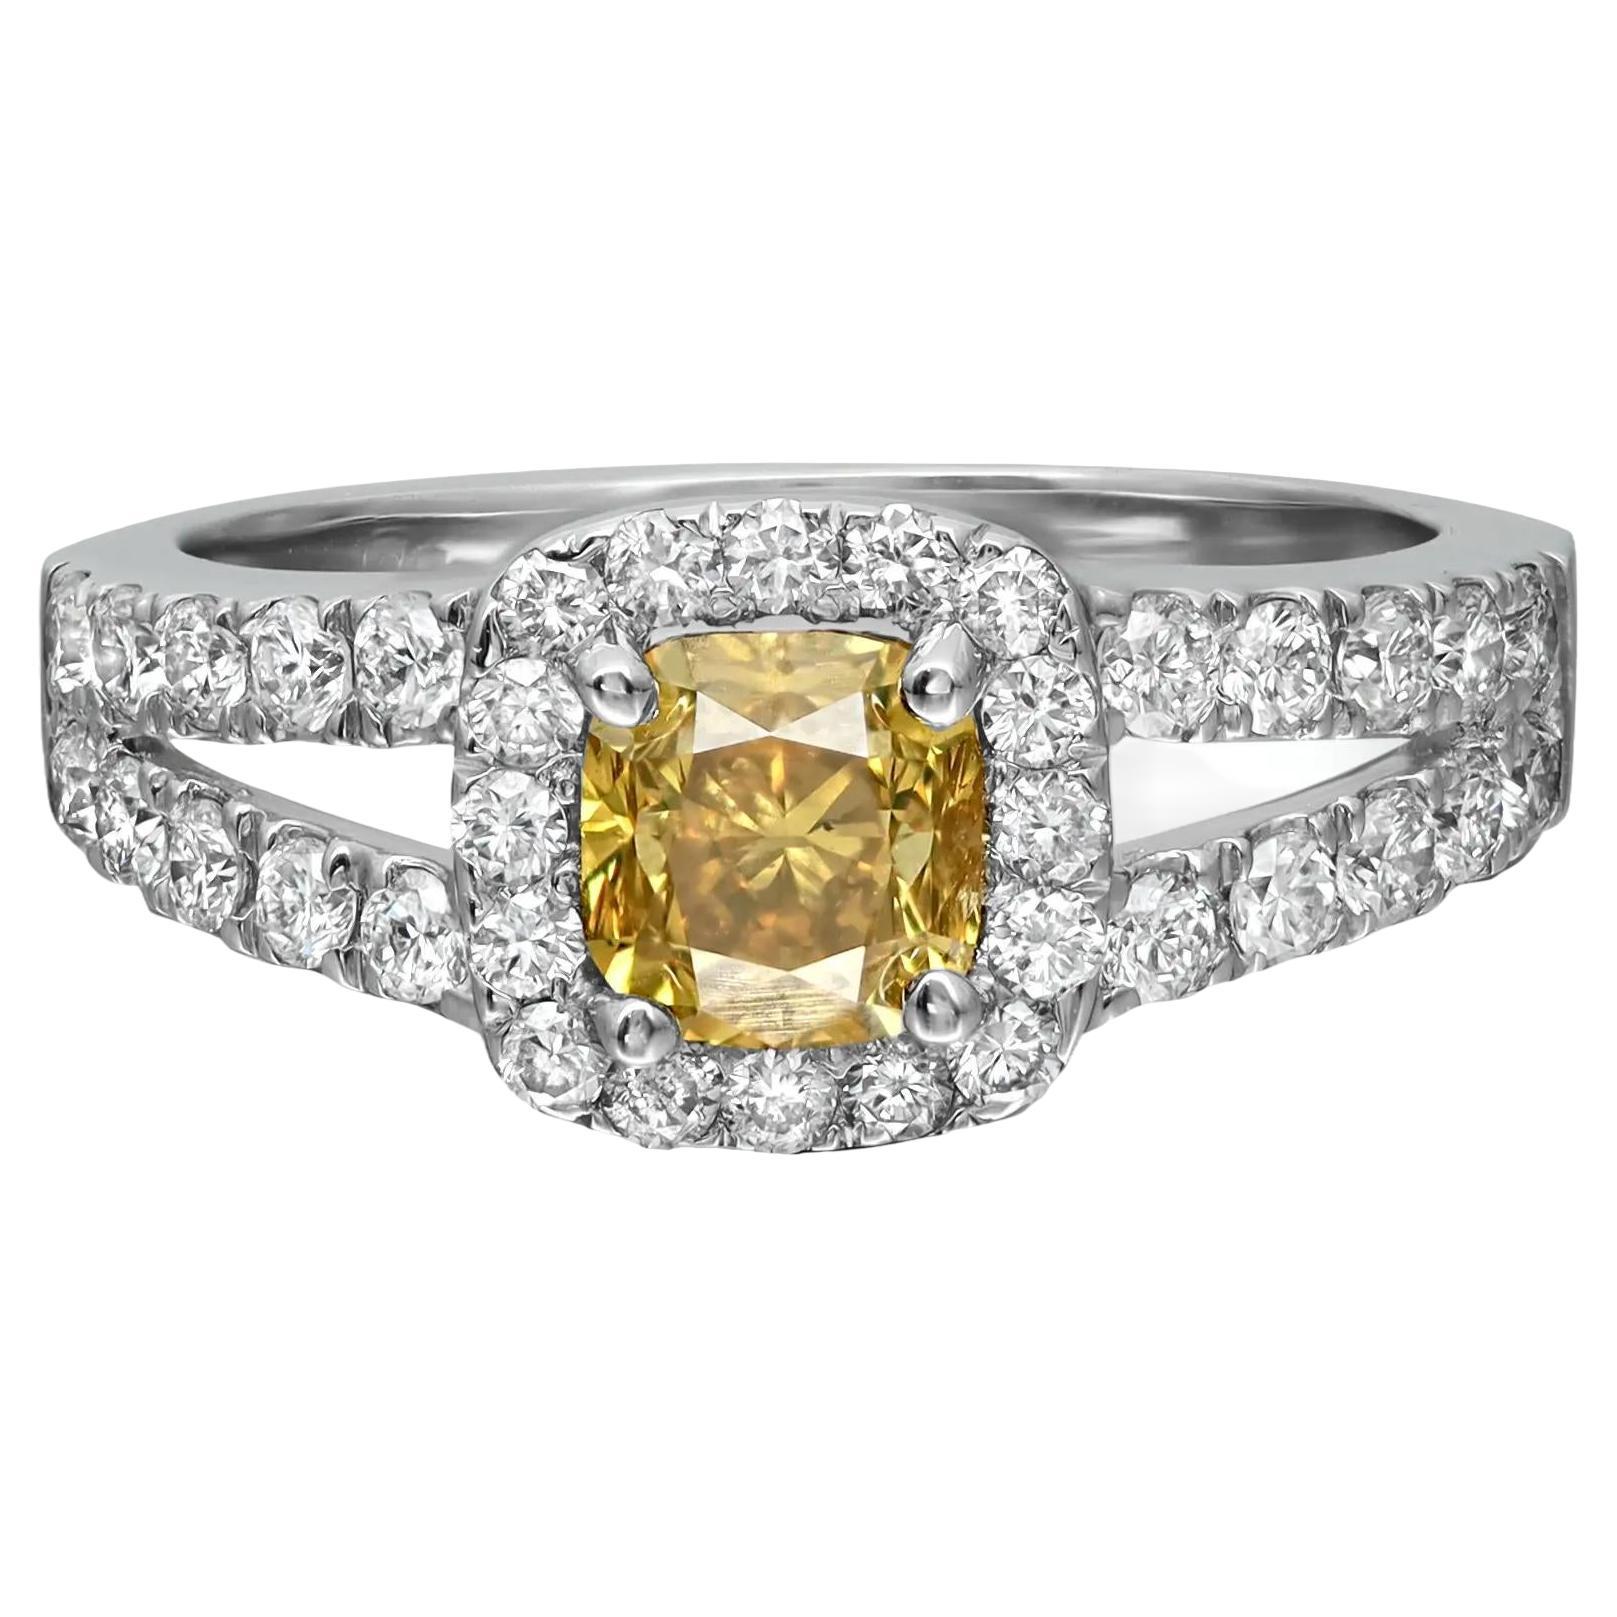 Cushion Cut Yellow & White Diamond Engagement Ring 18K White Gold Size 6.5 For Sale